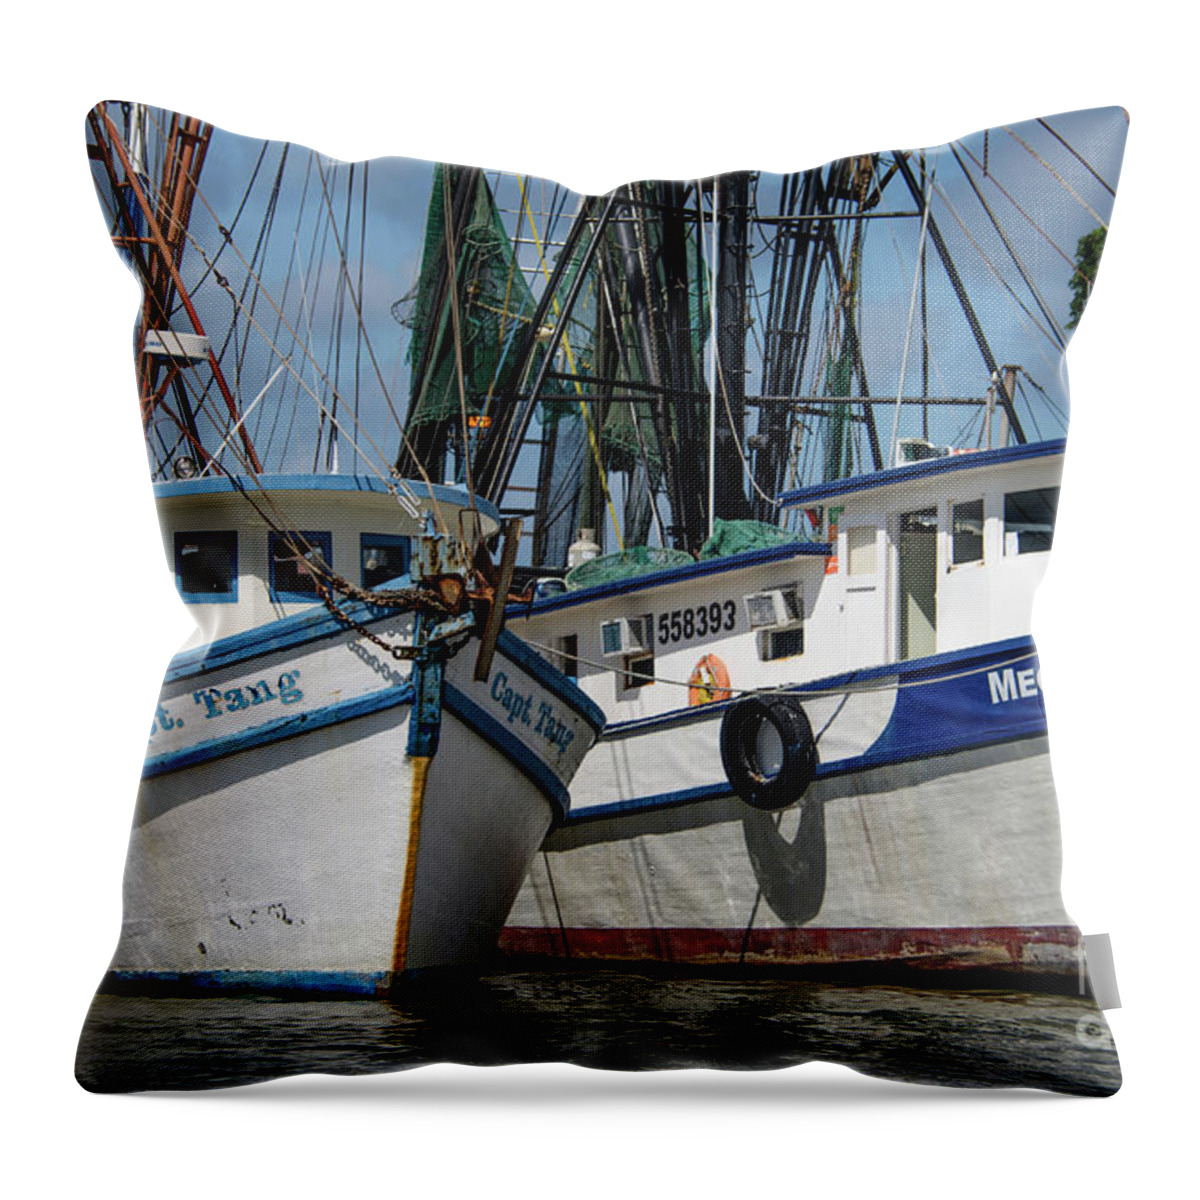 Capt Tang Throw Pillow featuring the photograph Shrimp Life by Dale Powell